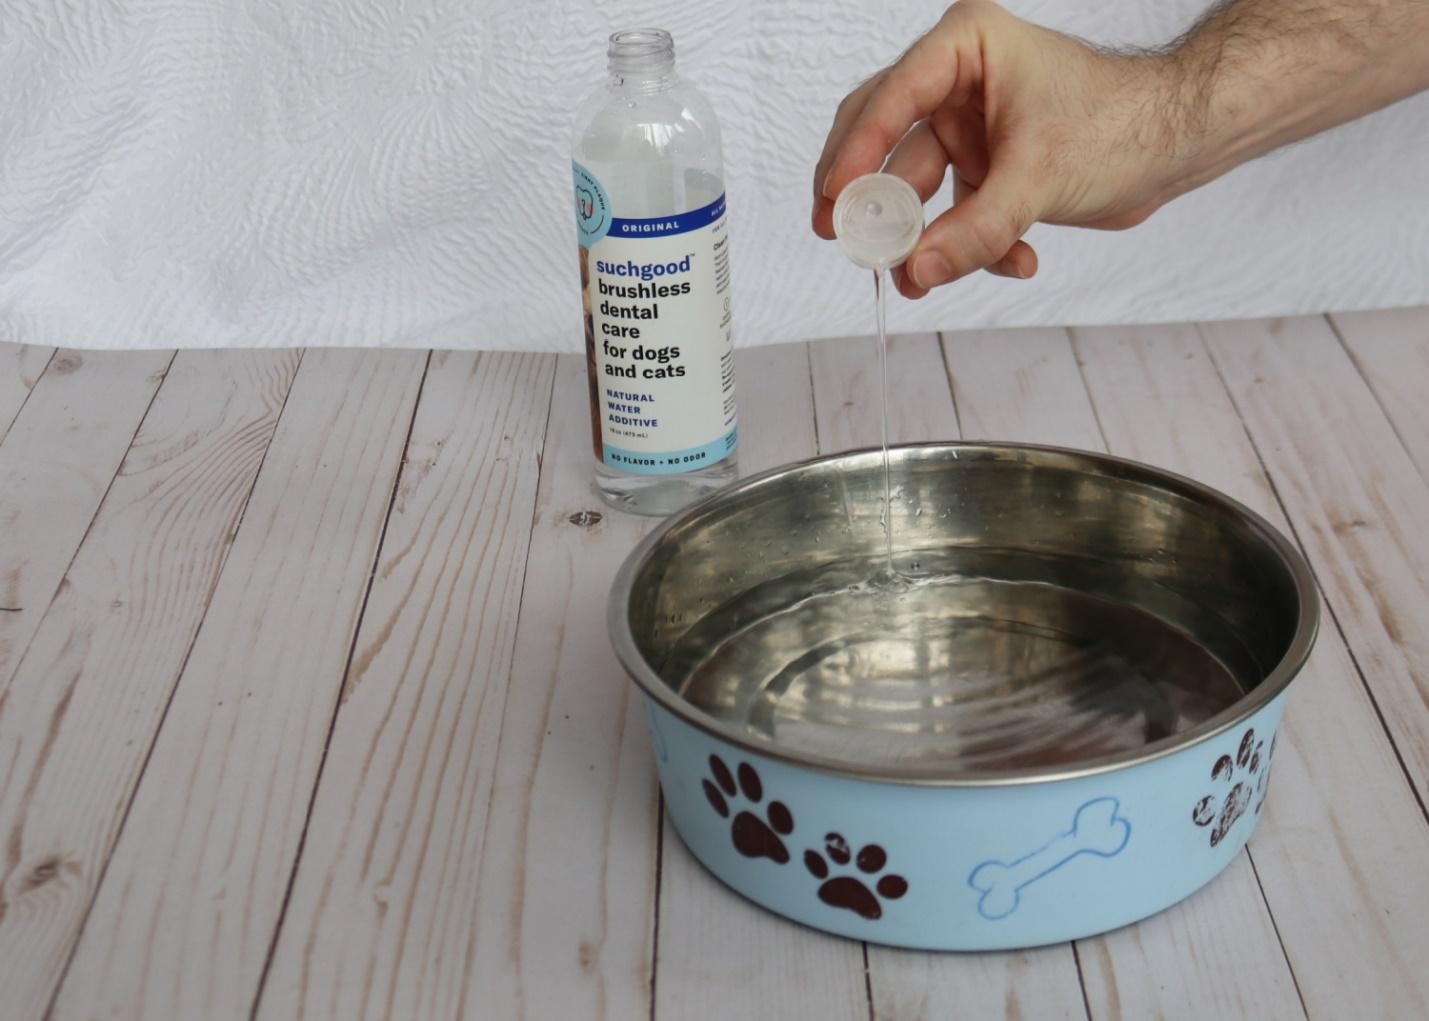 Shown are a bowl of dog water and Suchgood water additive